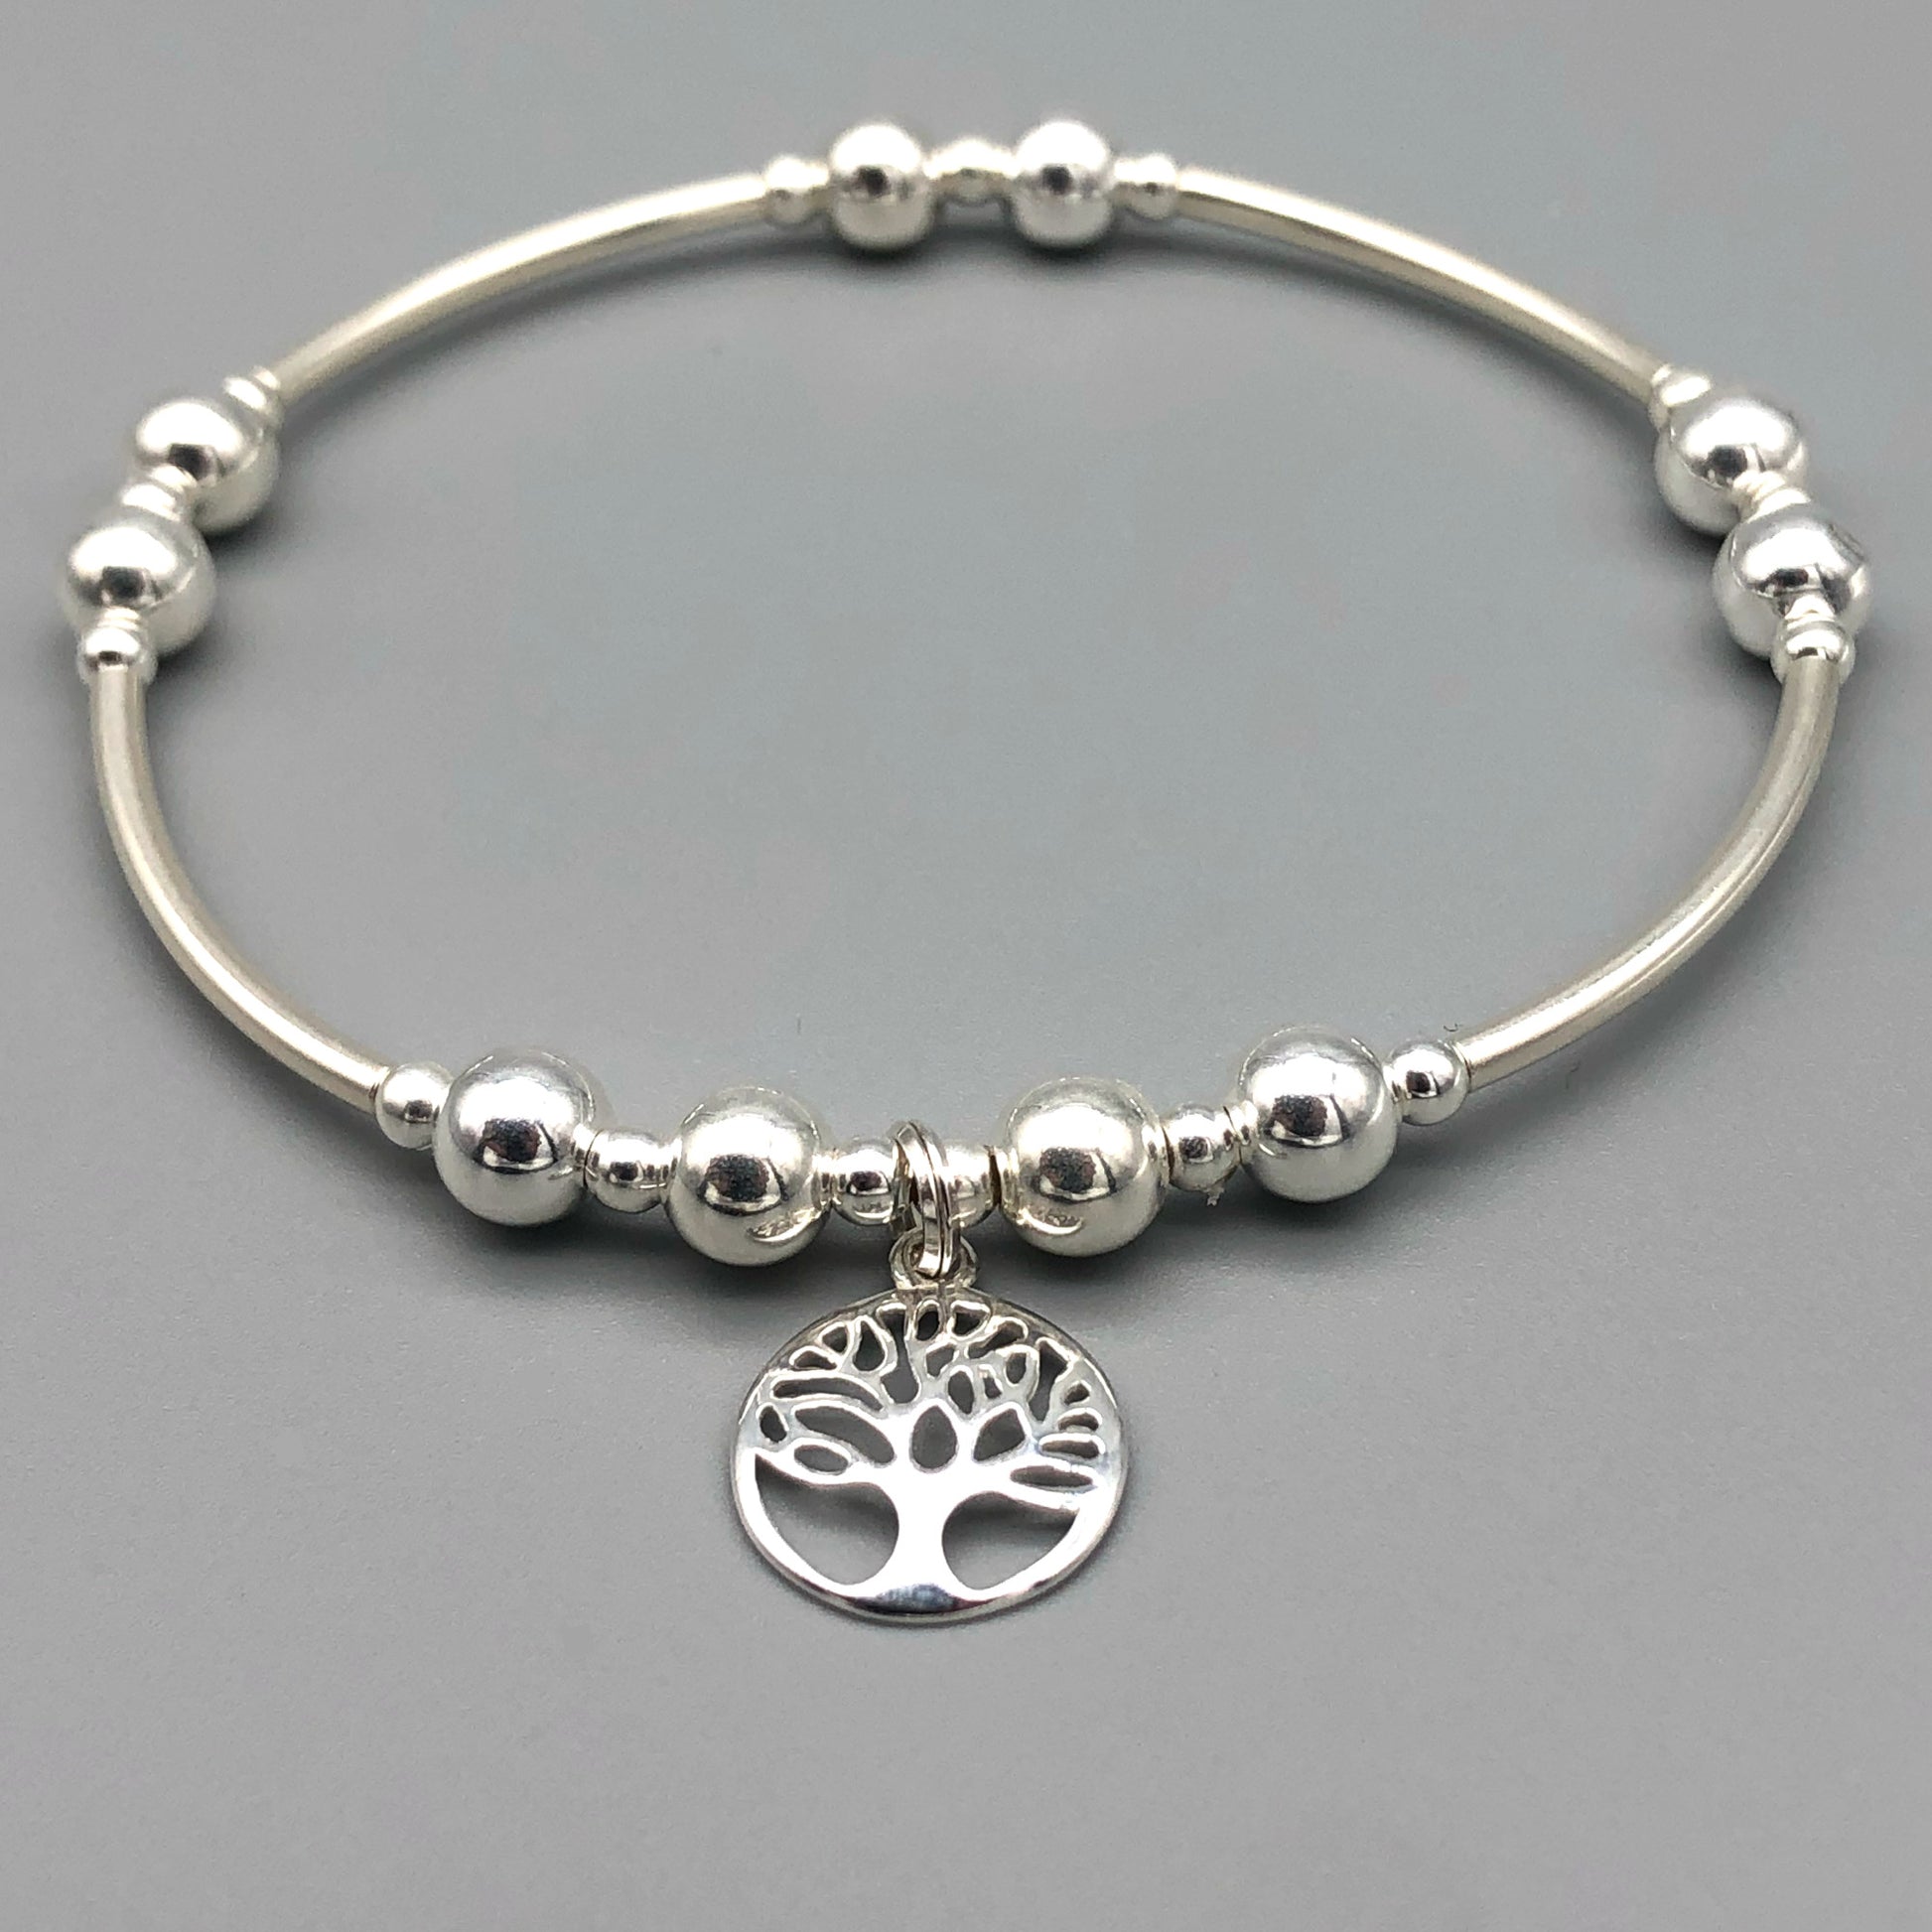 Tree of Life charm women's sterling silver stacking bracelet by My Silver Wish